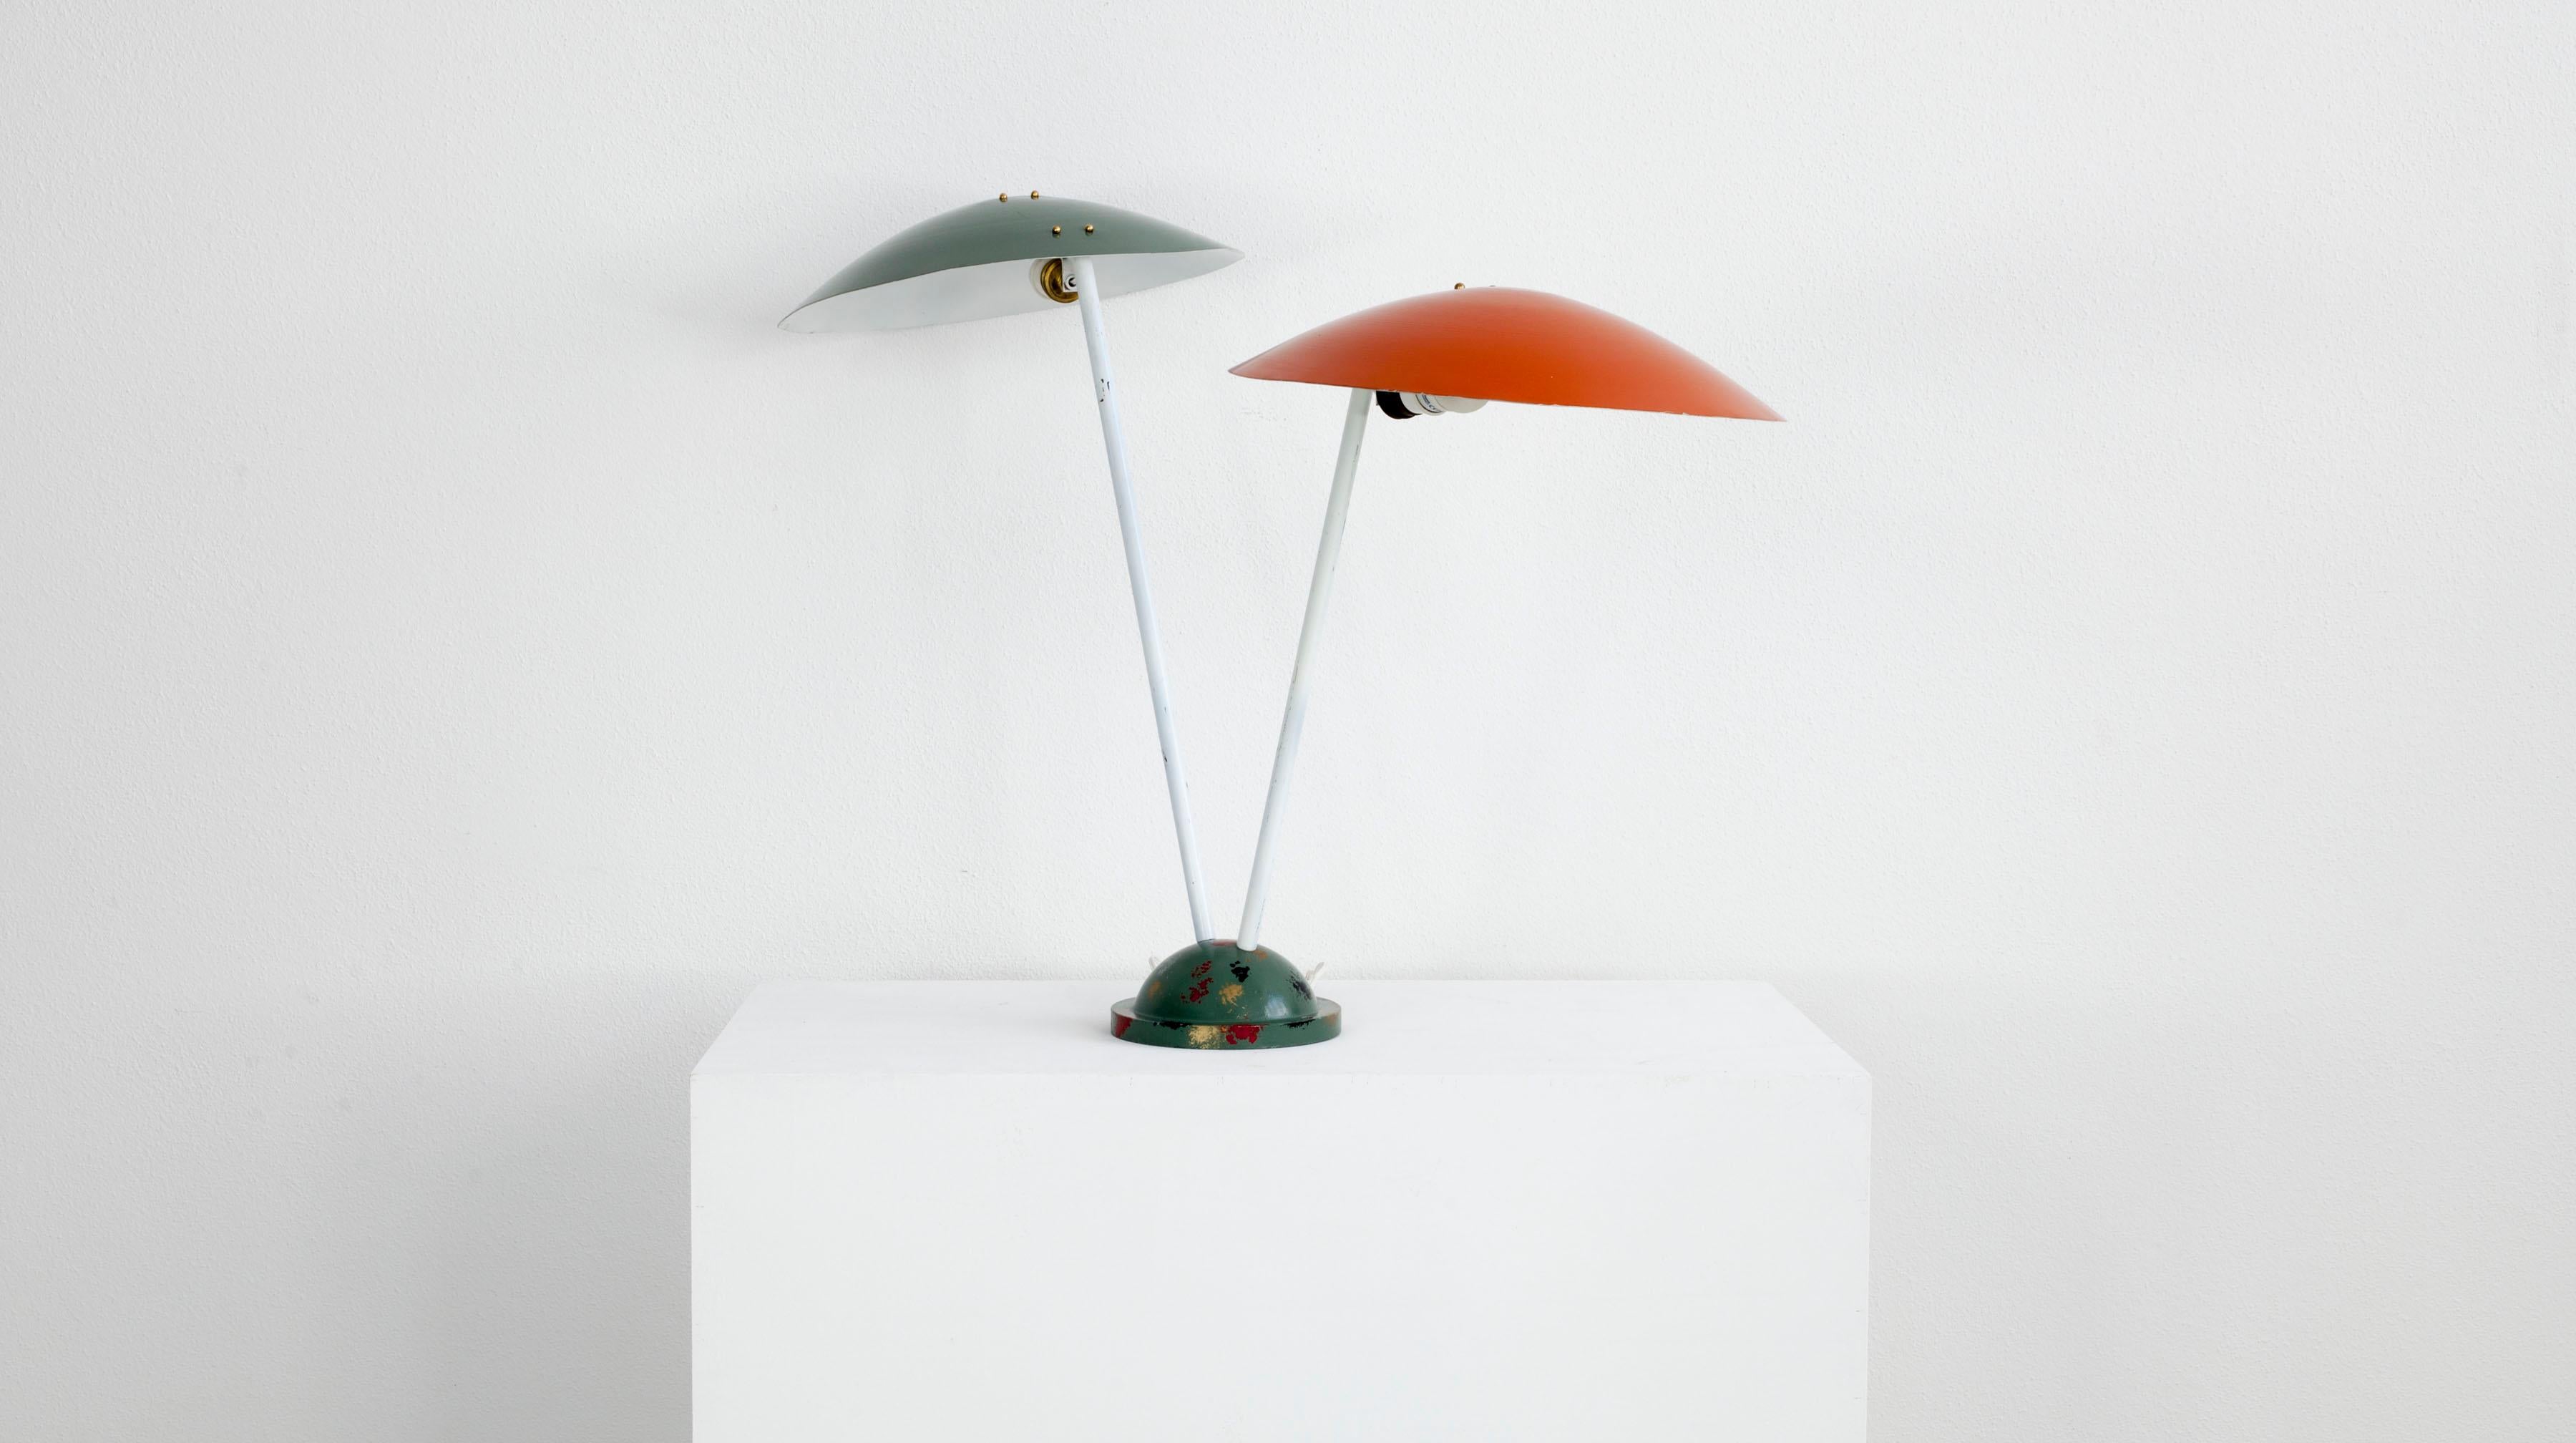 Italian lamp from the 1950s. The lamp has a metal frame painted white and aluminum shade painted orange and green. It is suitable for ceiling, table or wall mounting. It has two E 27 sockets and is in good condition except for patina due to